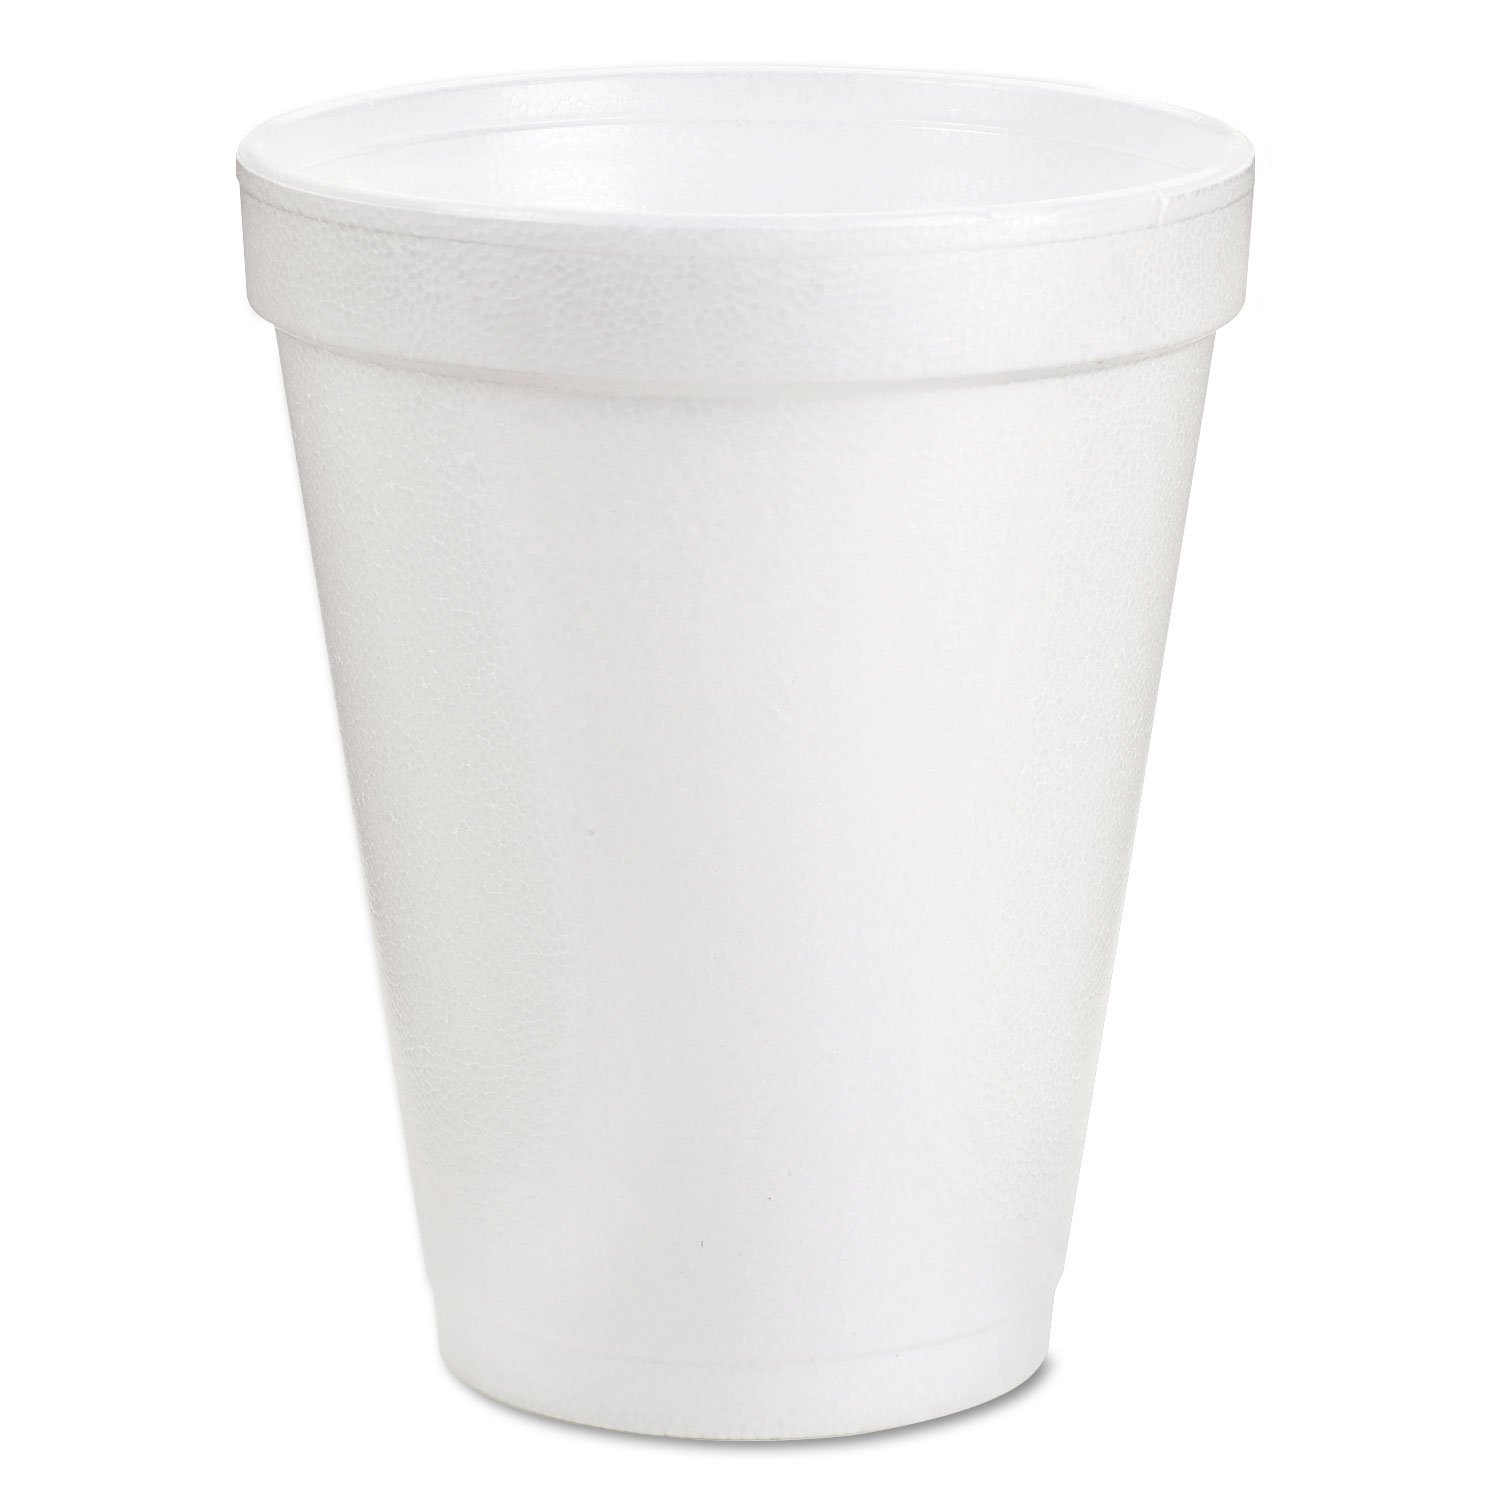 DART 8J8 Insulated Styrofoam Cup, 8 Oz, 1000/CT, White, 1000 Count (Pack of 1)